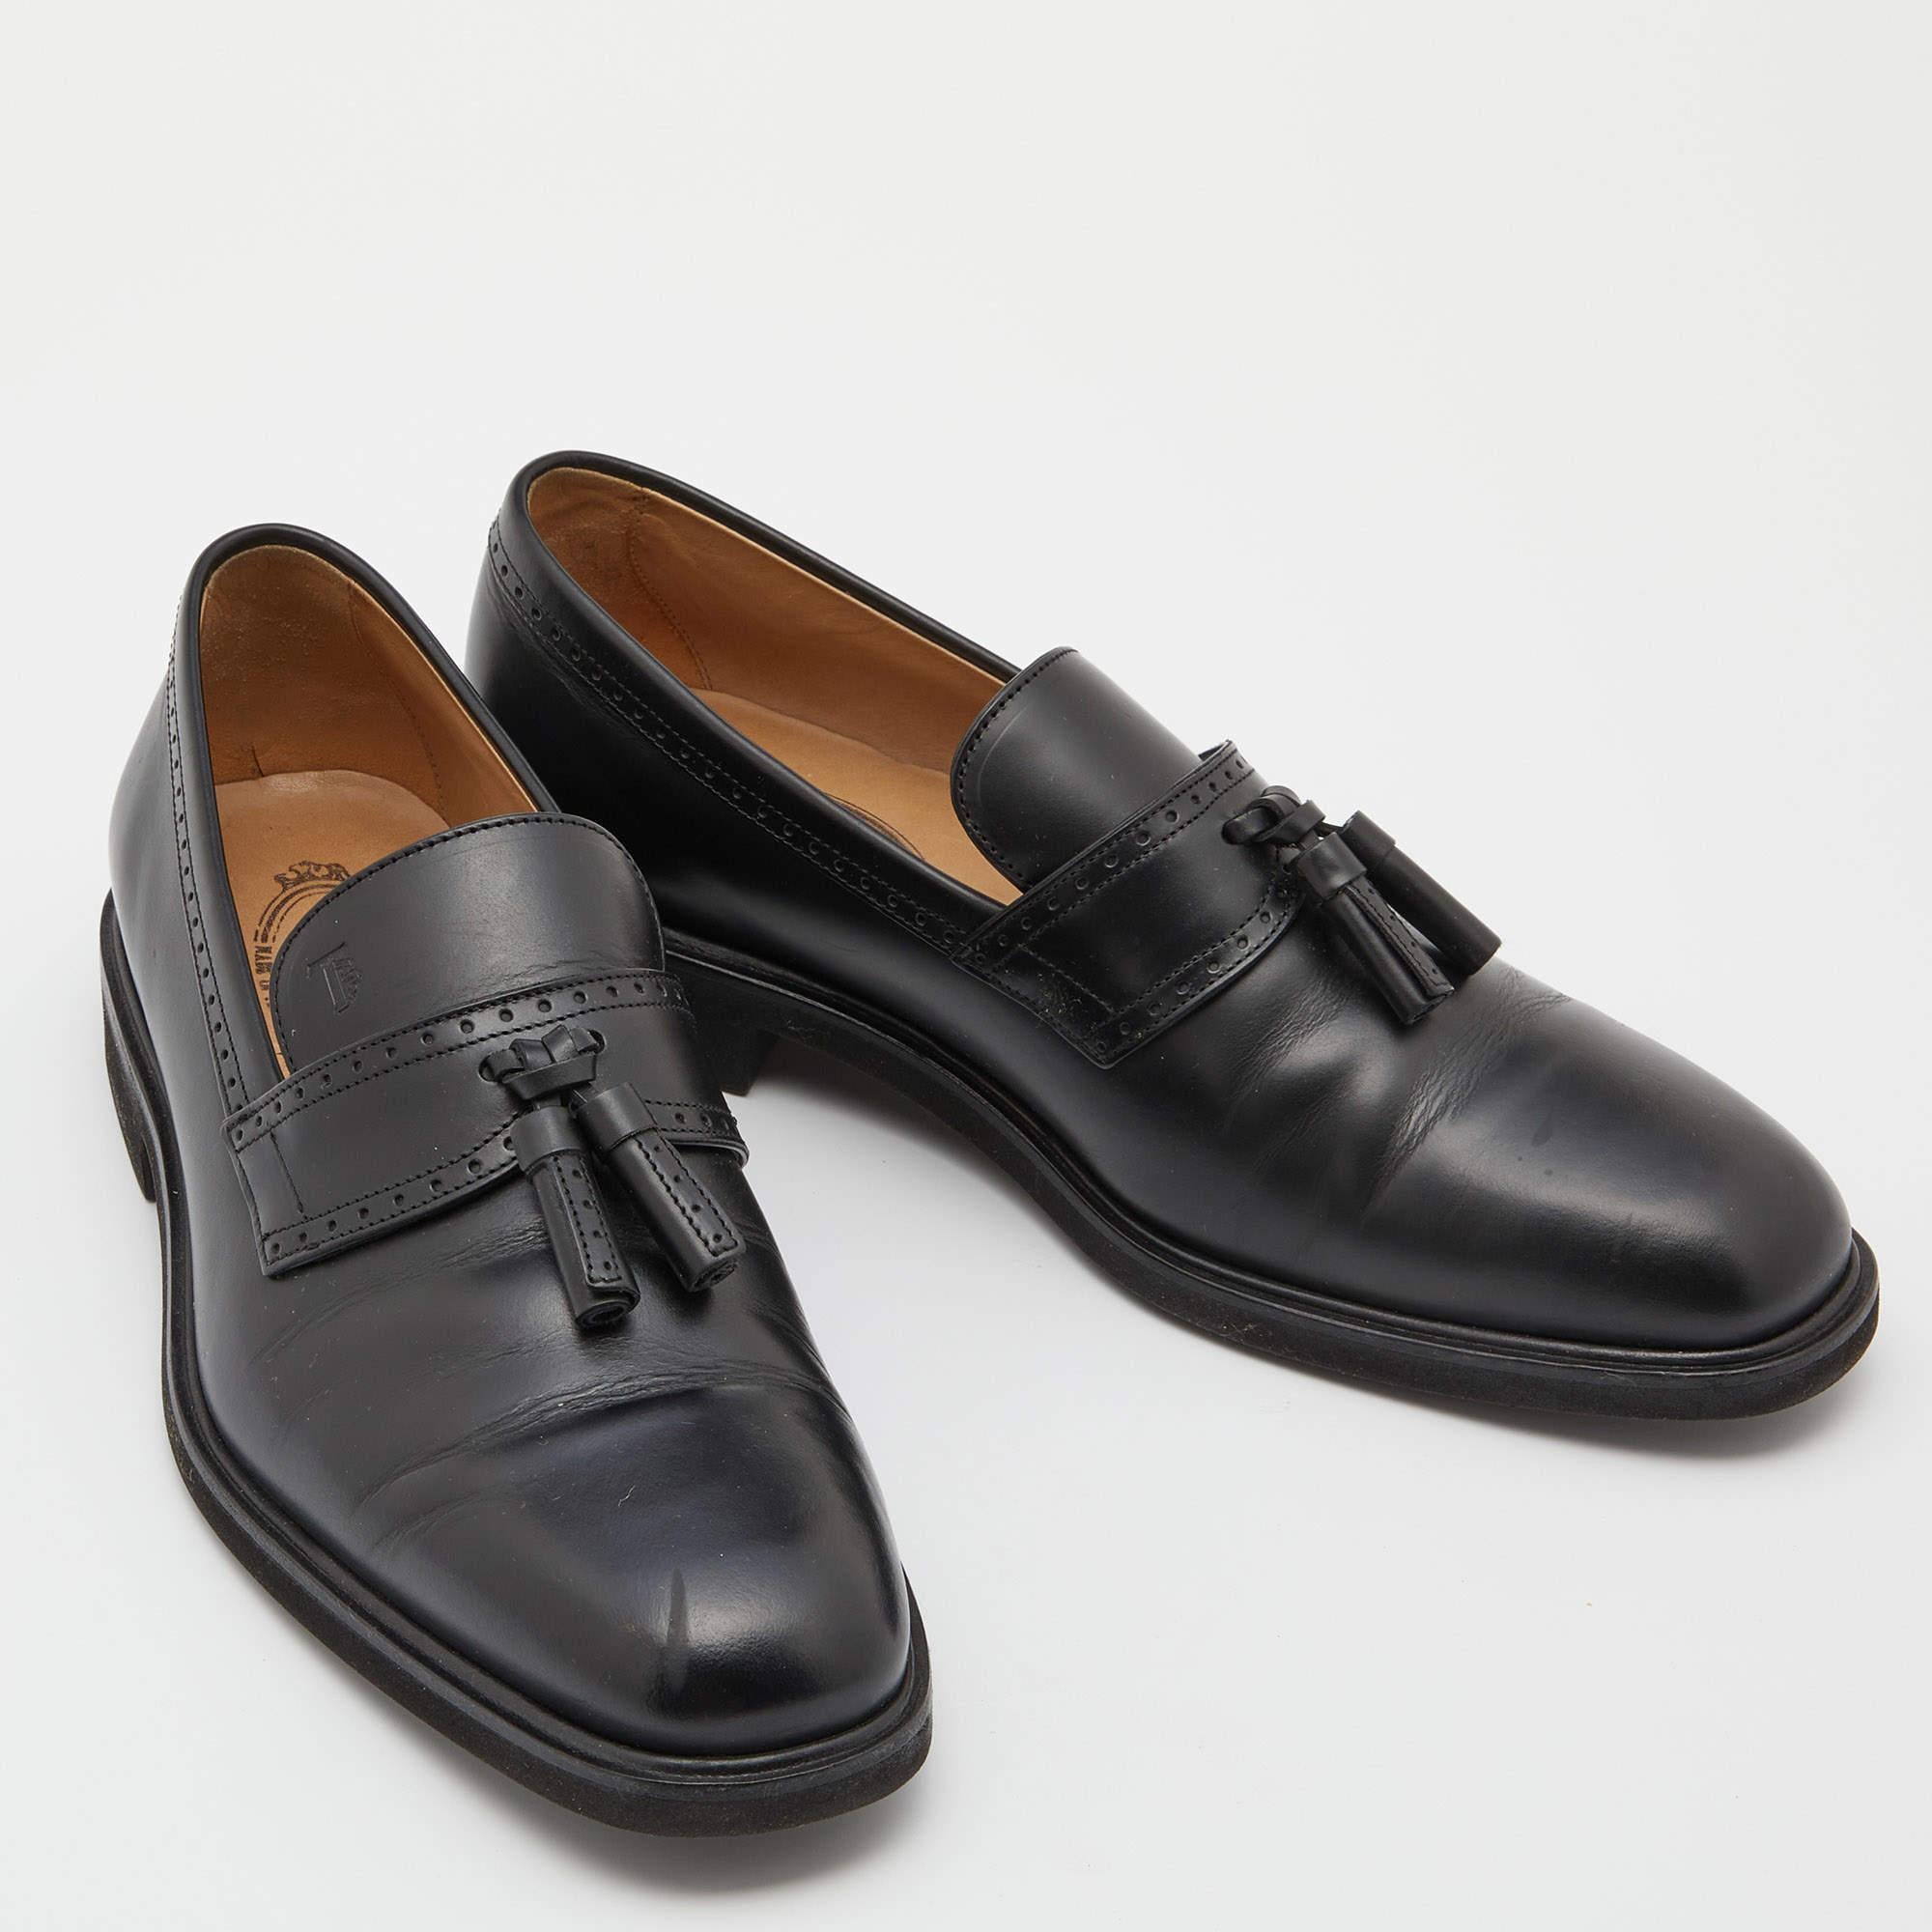 Tod's Black Leather Tassel Loafers Size 39.5 For Sale 1